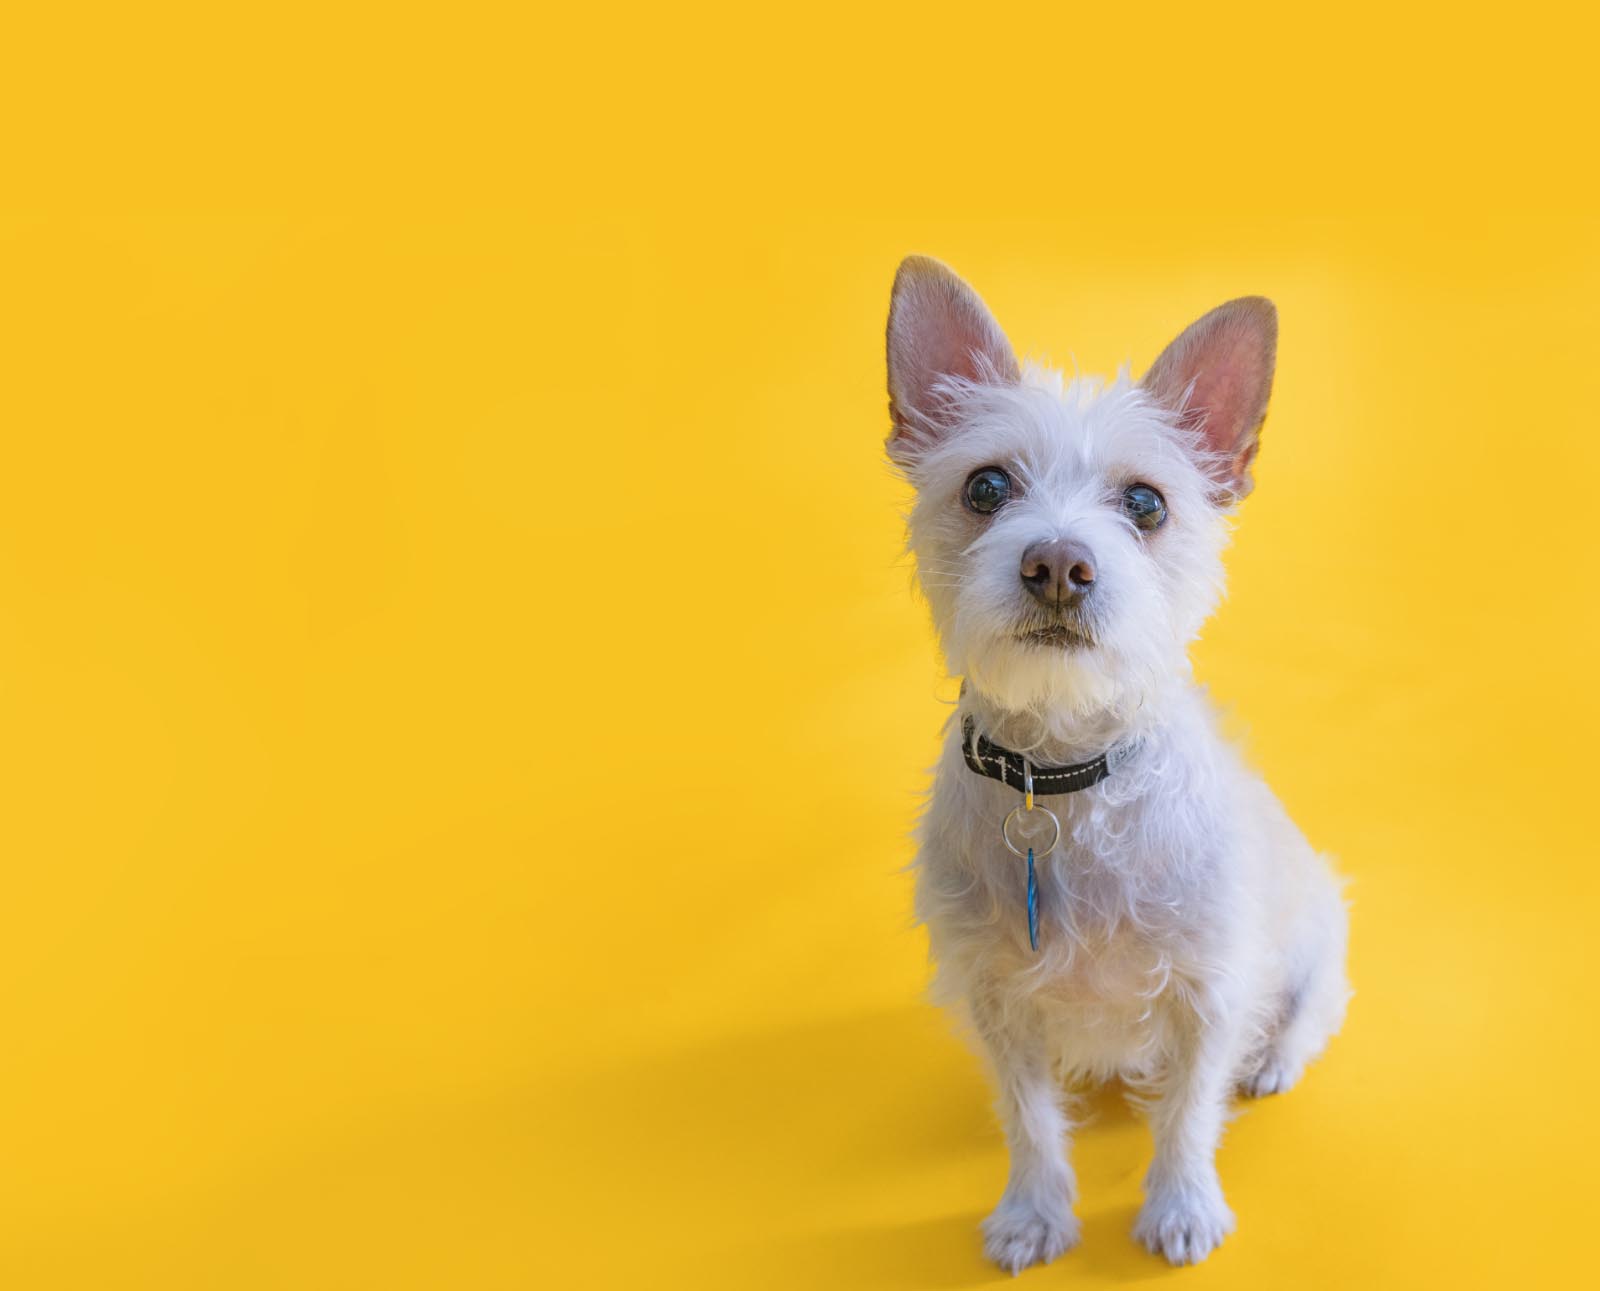 Brave Buddies: Confidence Building for Small Dogs